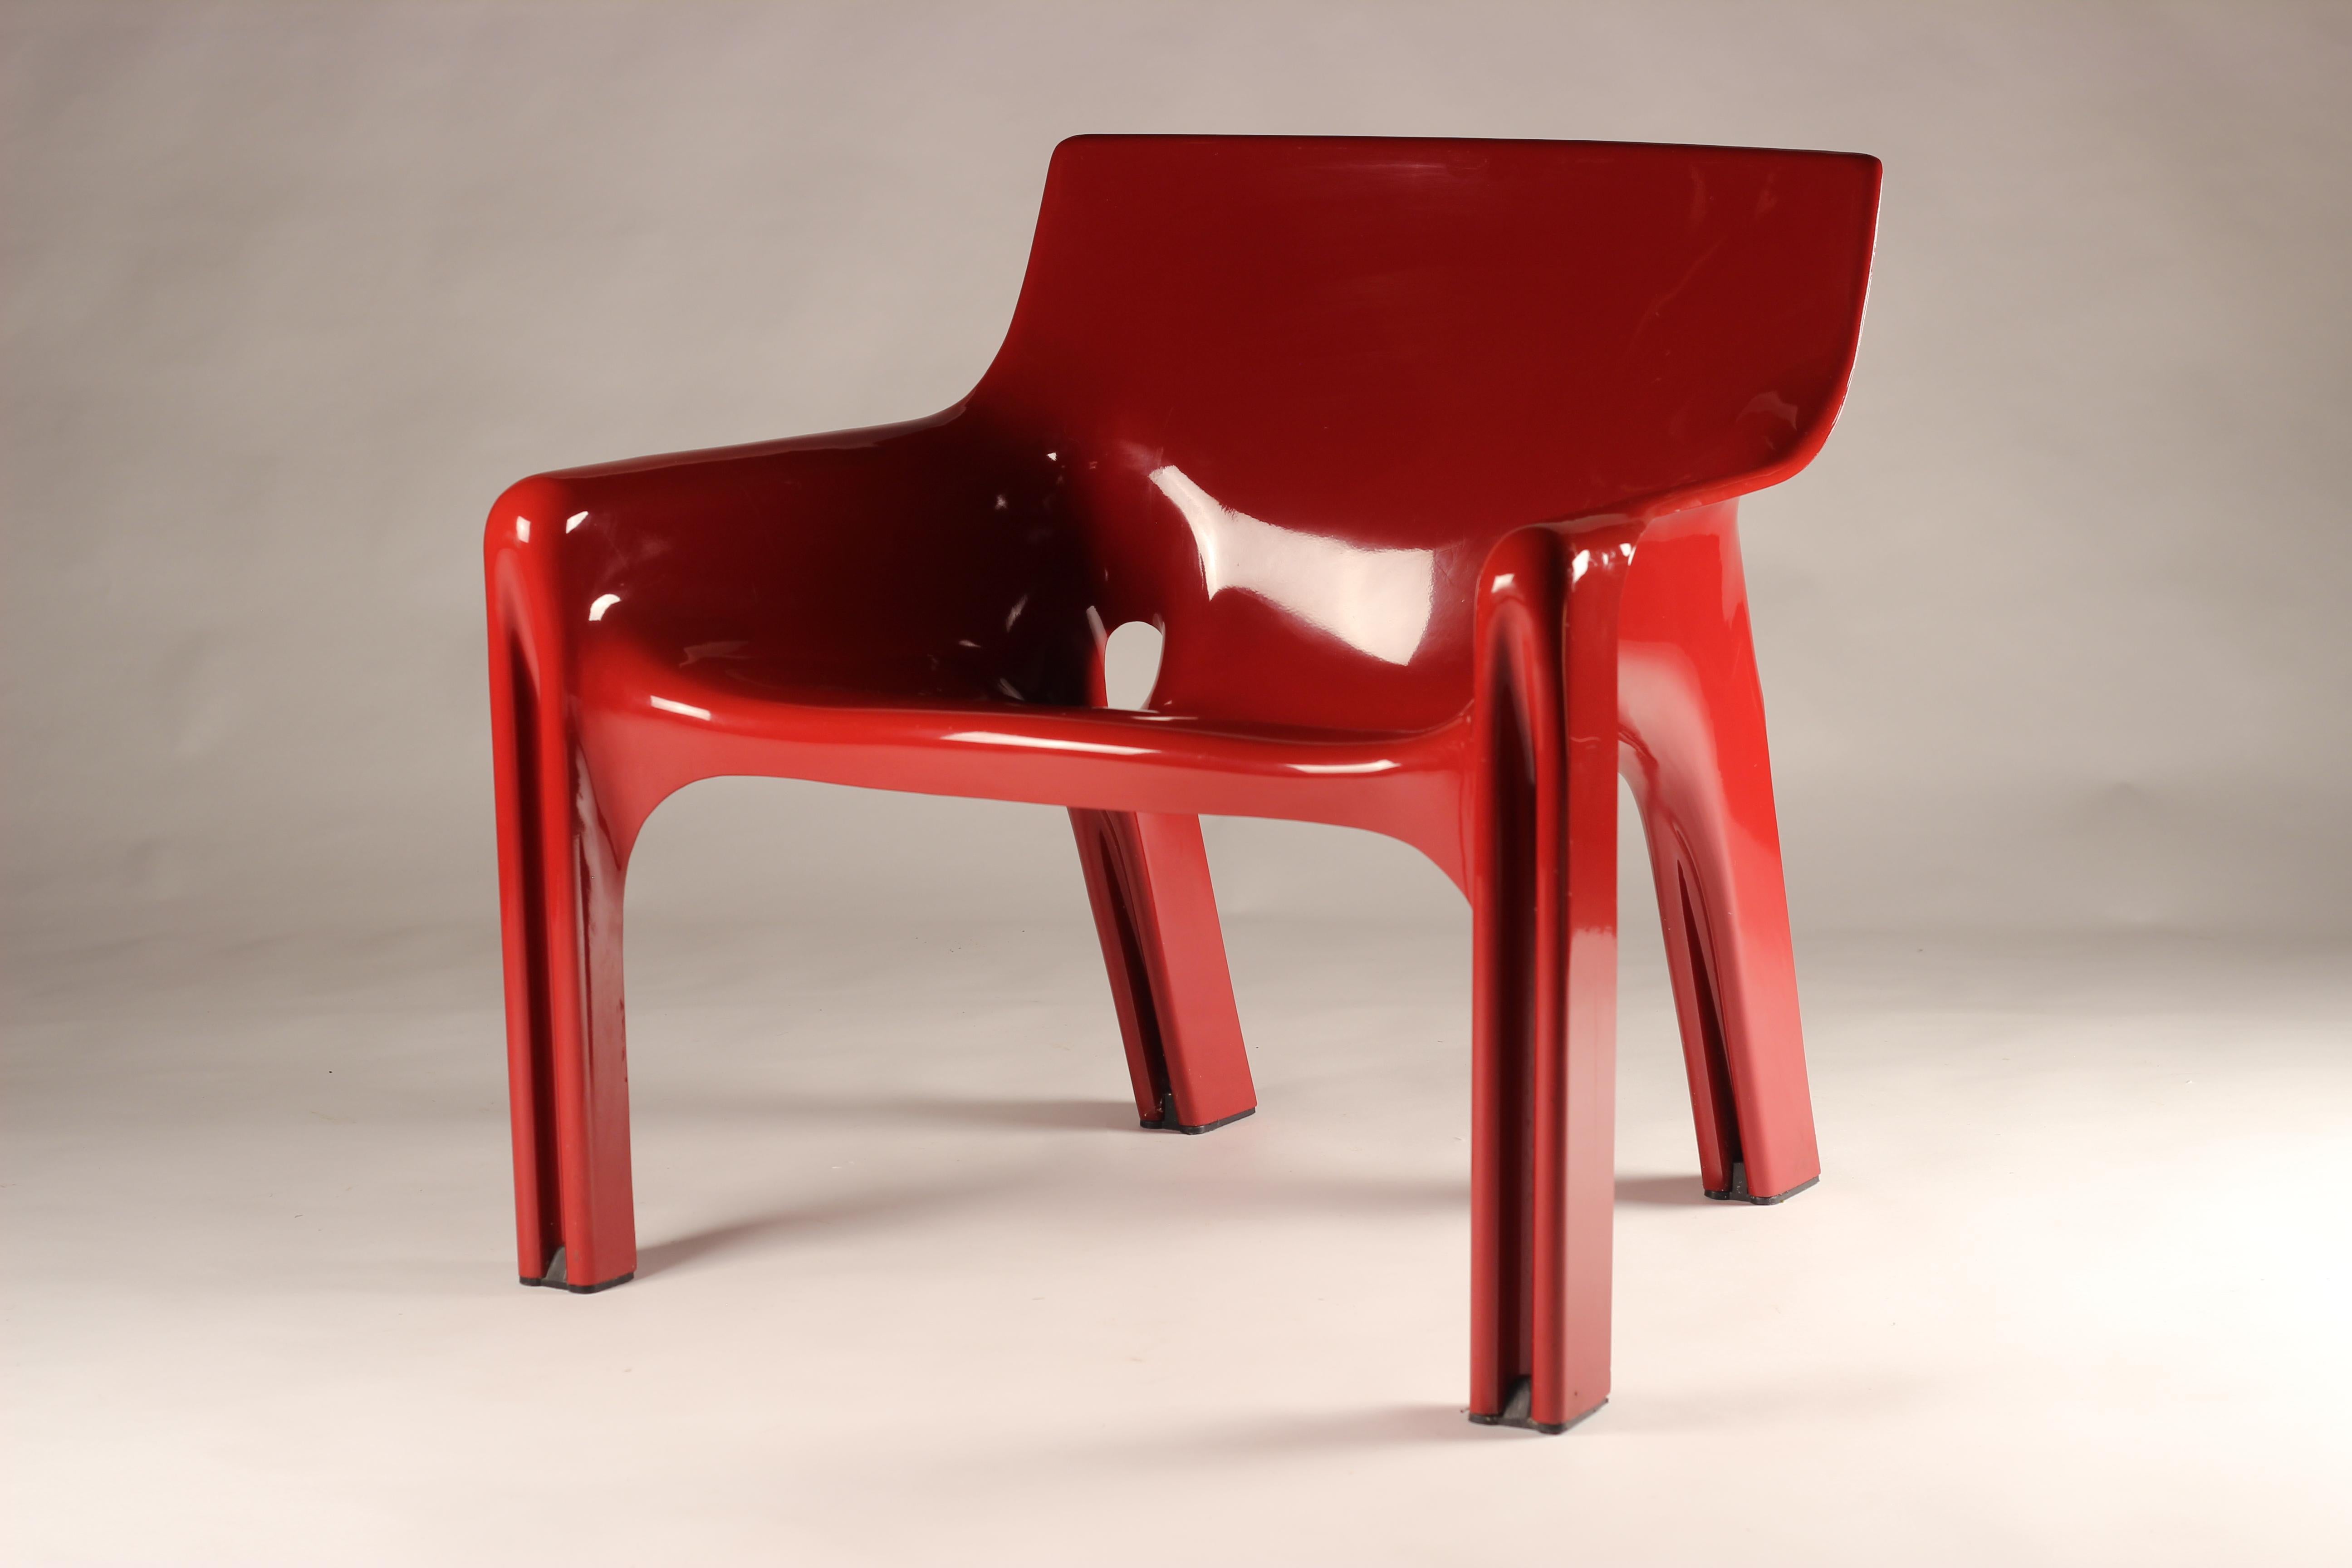 Molded Red Original Lounge Chair Vicario Designed by Vico Magistretti Made by Artemide